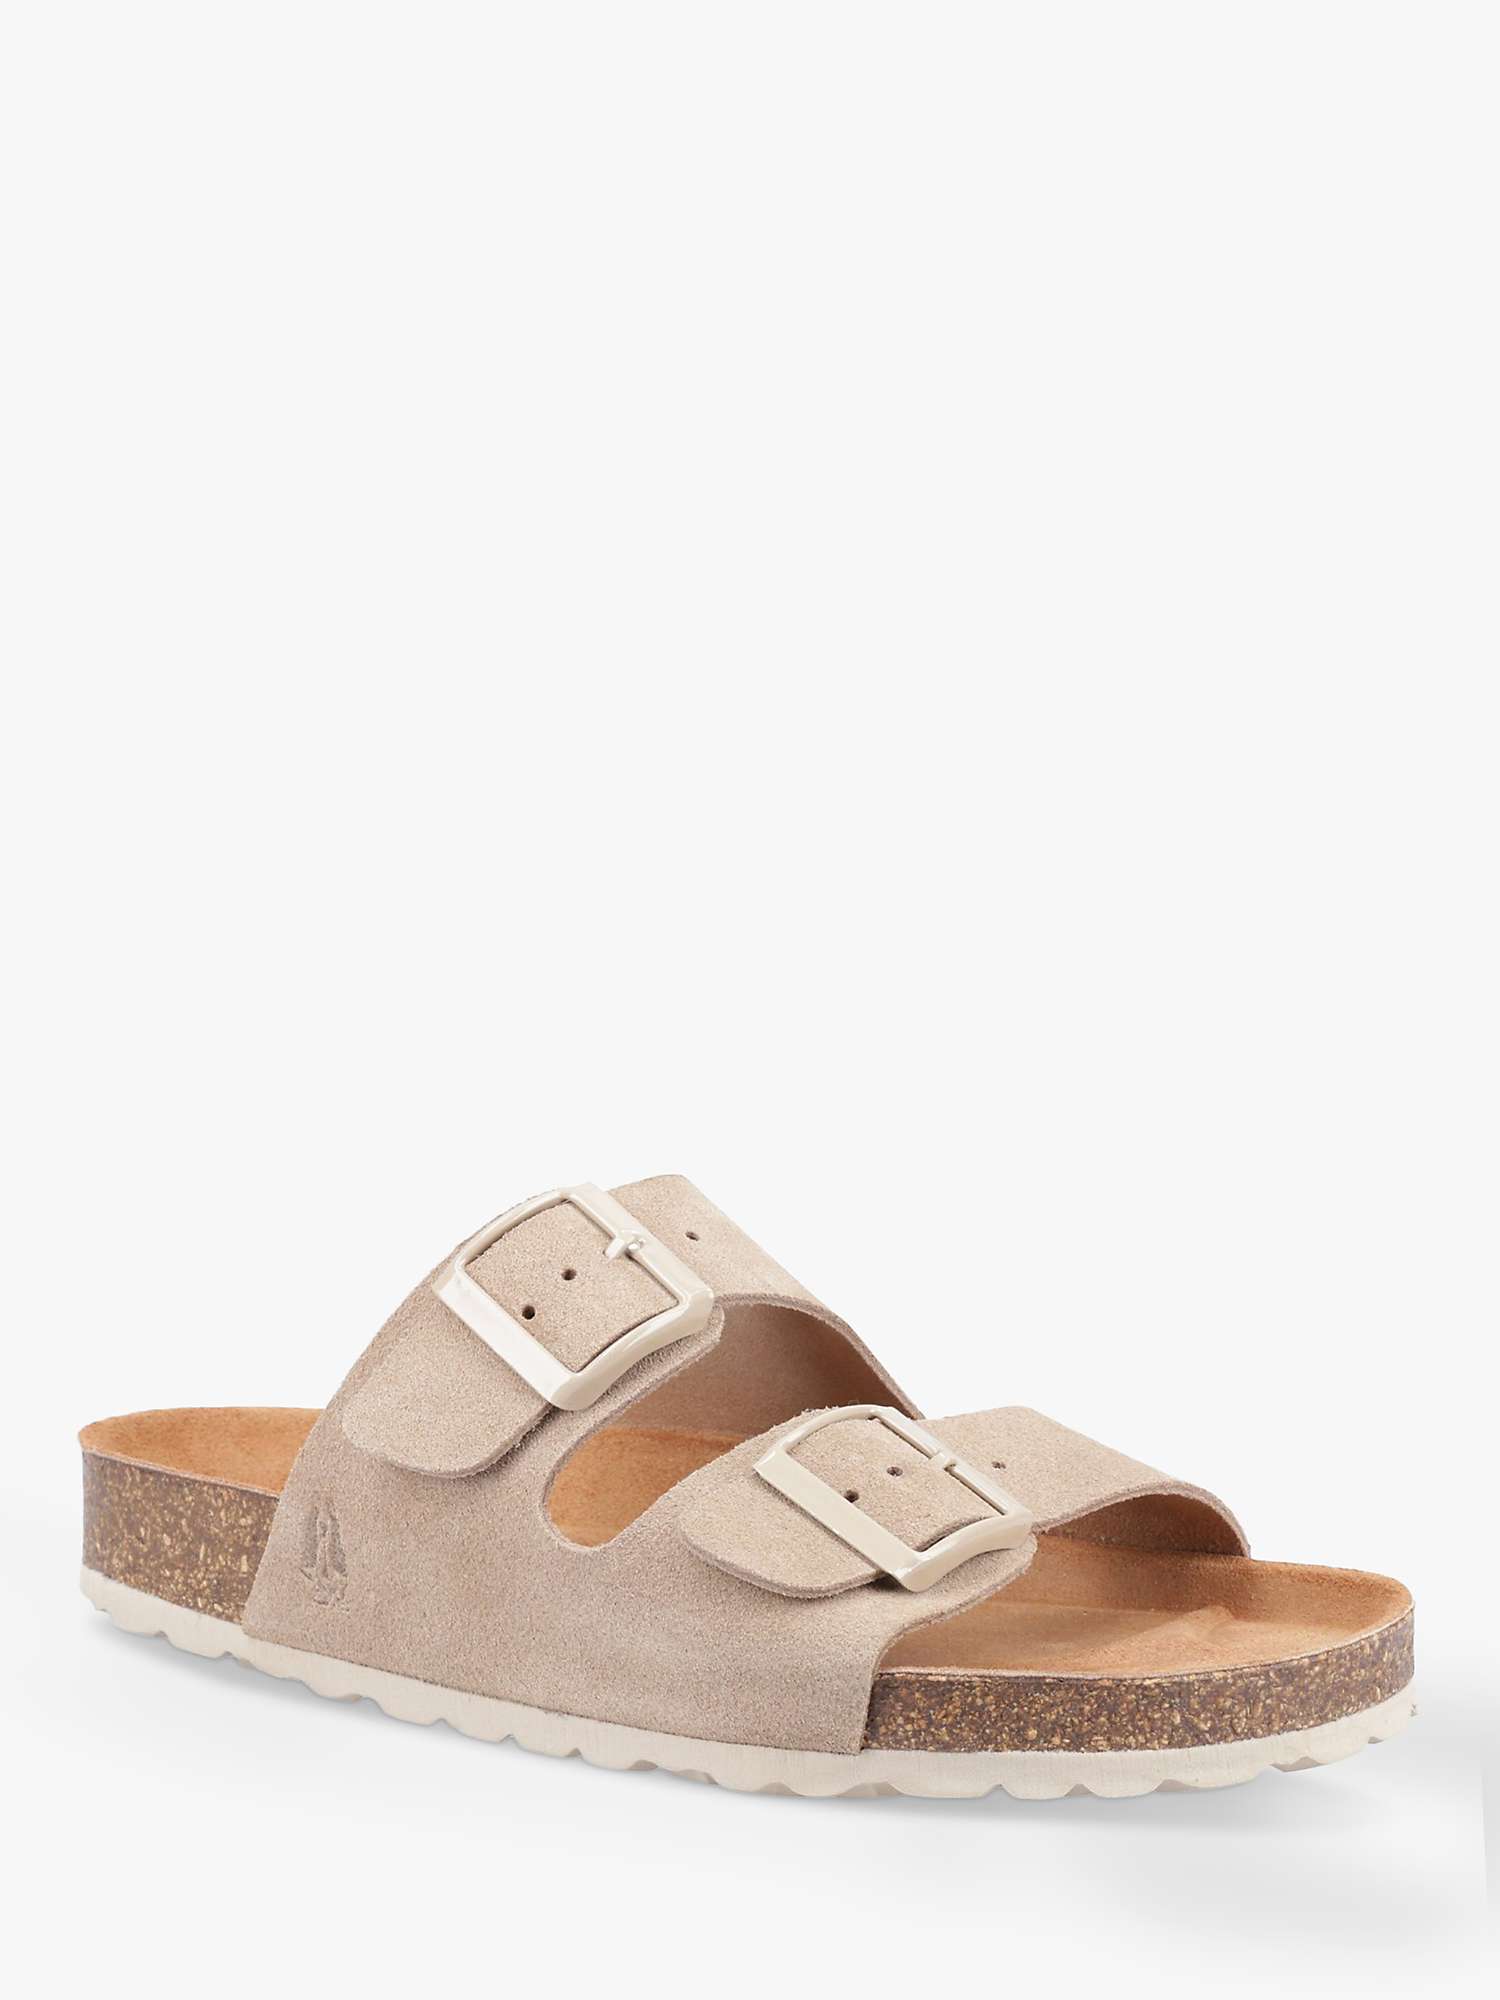 Buy Hush Puppies Blaire Suede Footbed Sandals Online at johnlewis.com